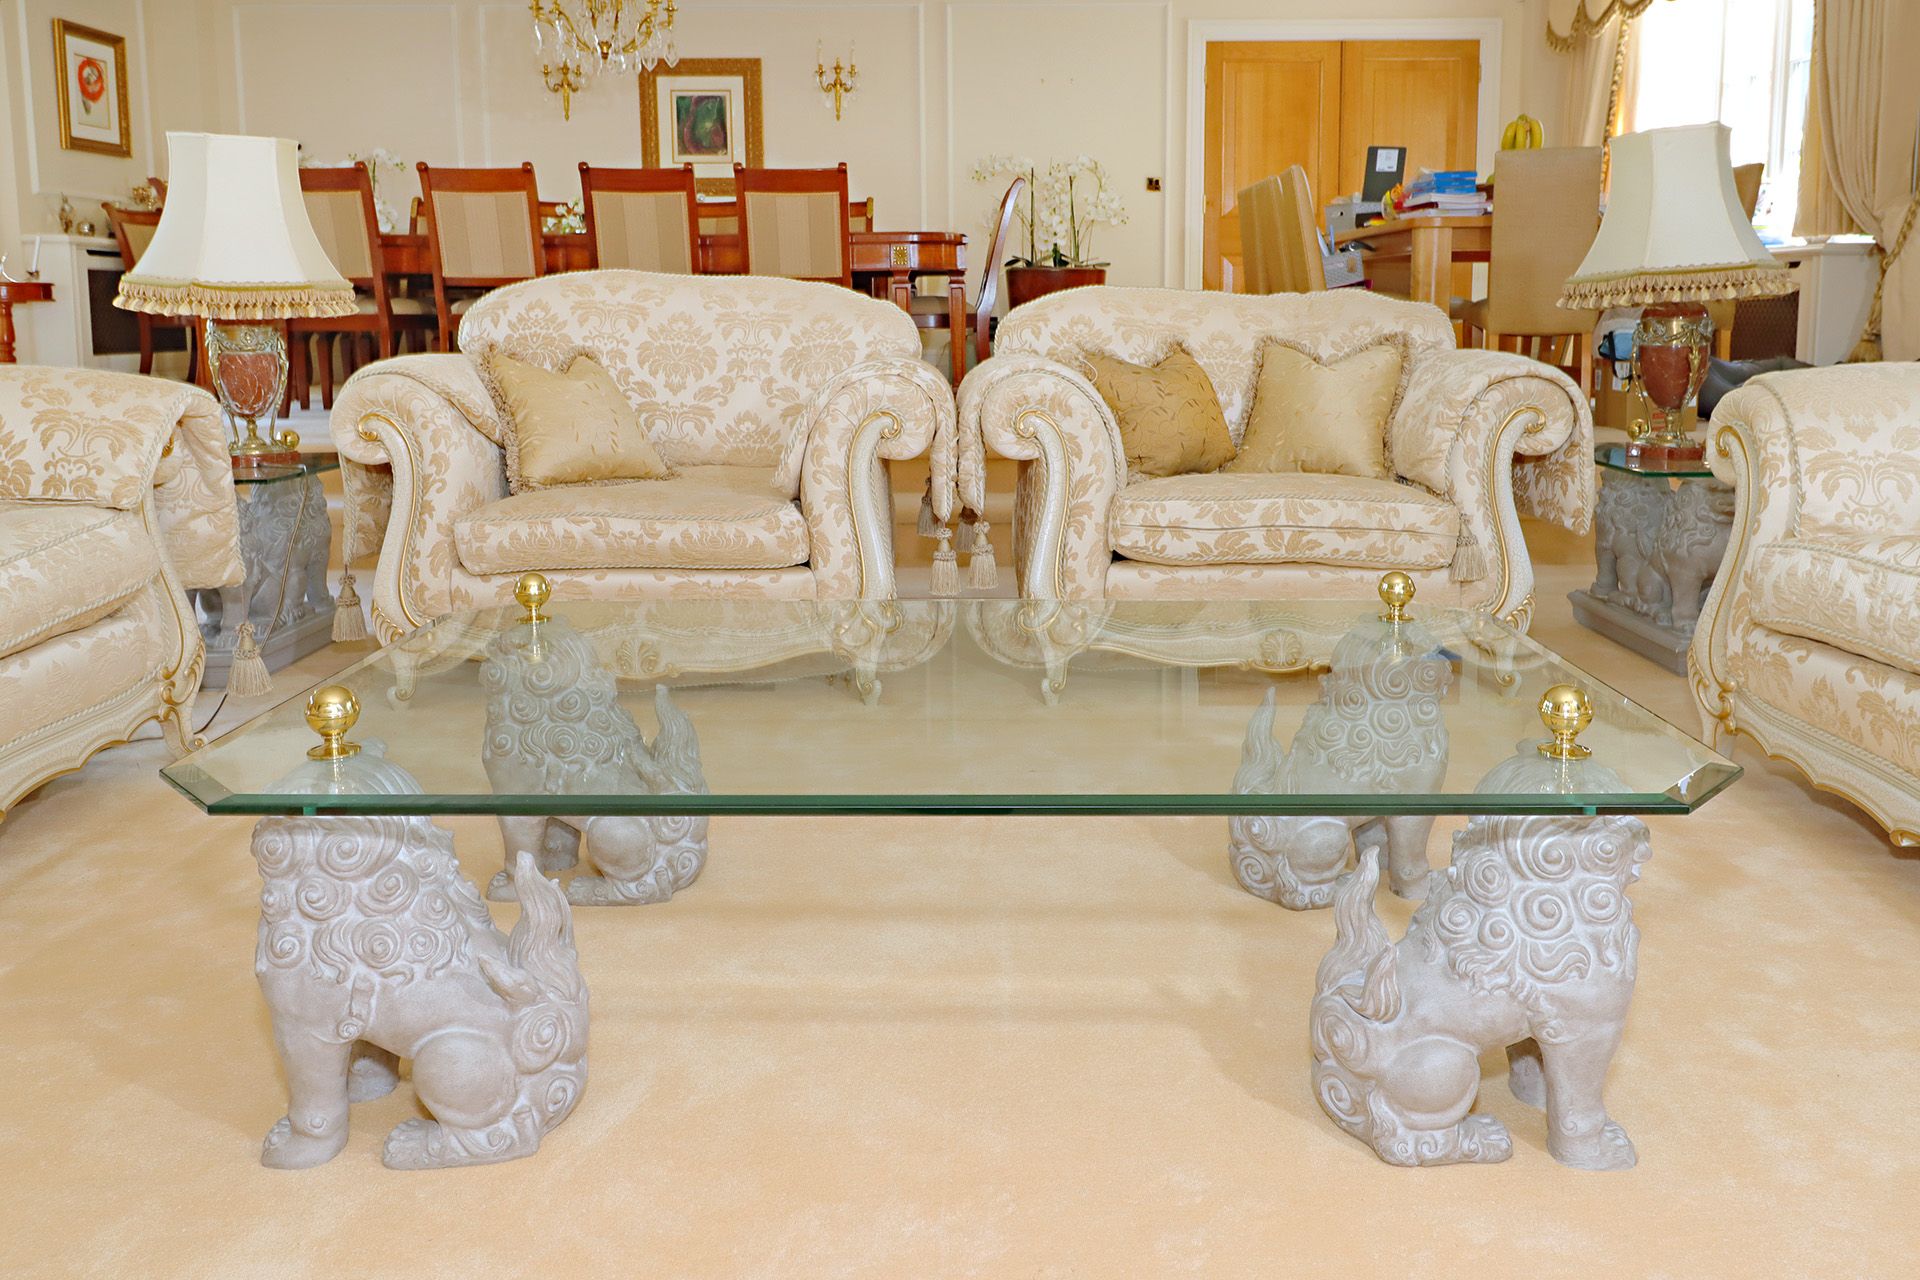 Glass top coffee table supported by a quadrant of guardian lion foo Dog pedestals with brass